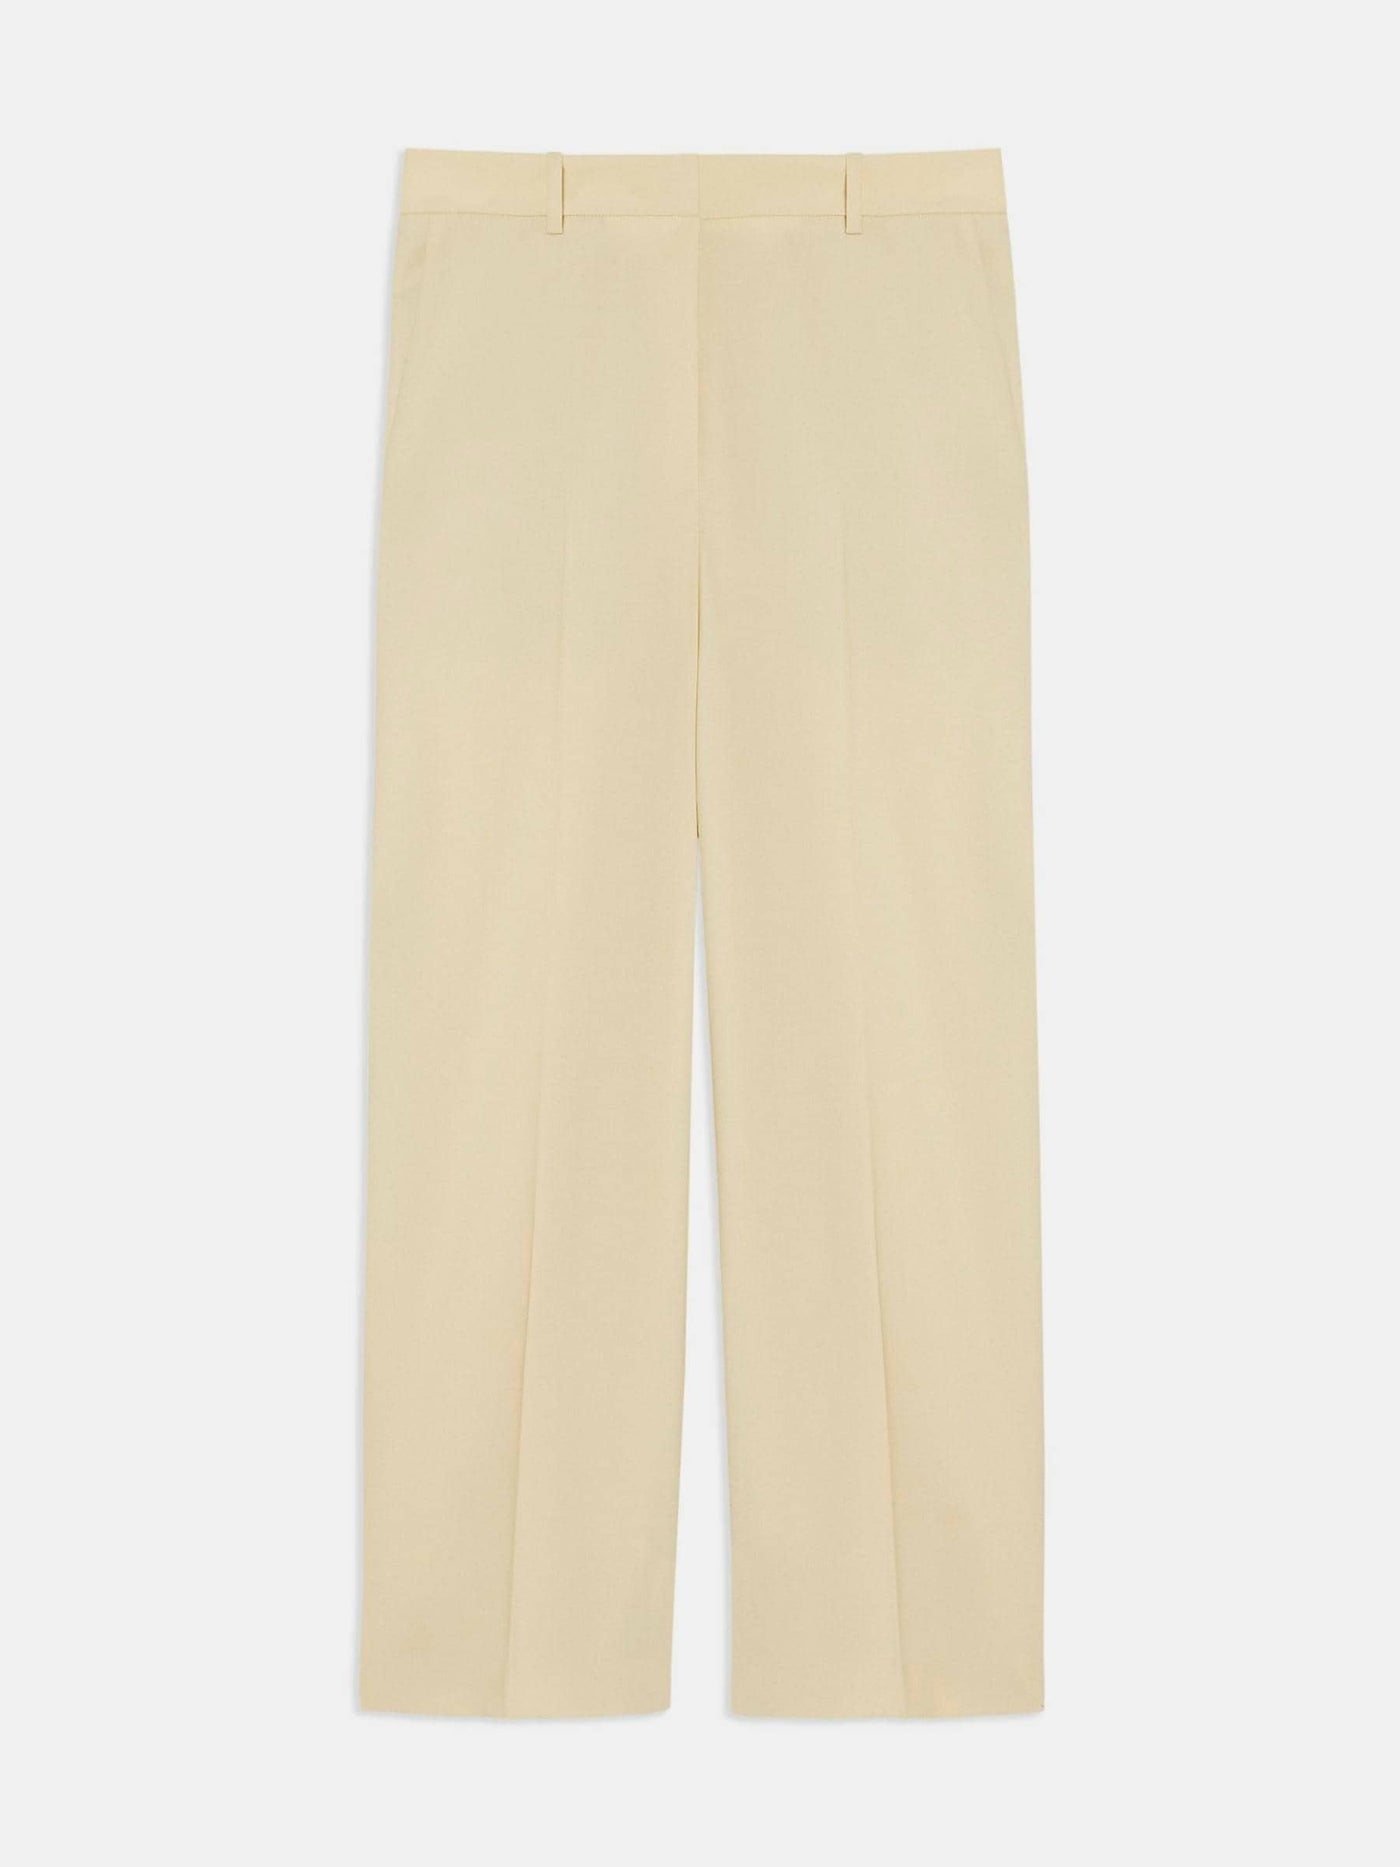 Trousers, buttery yellow